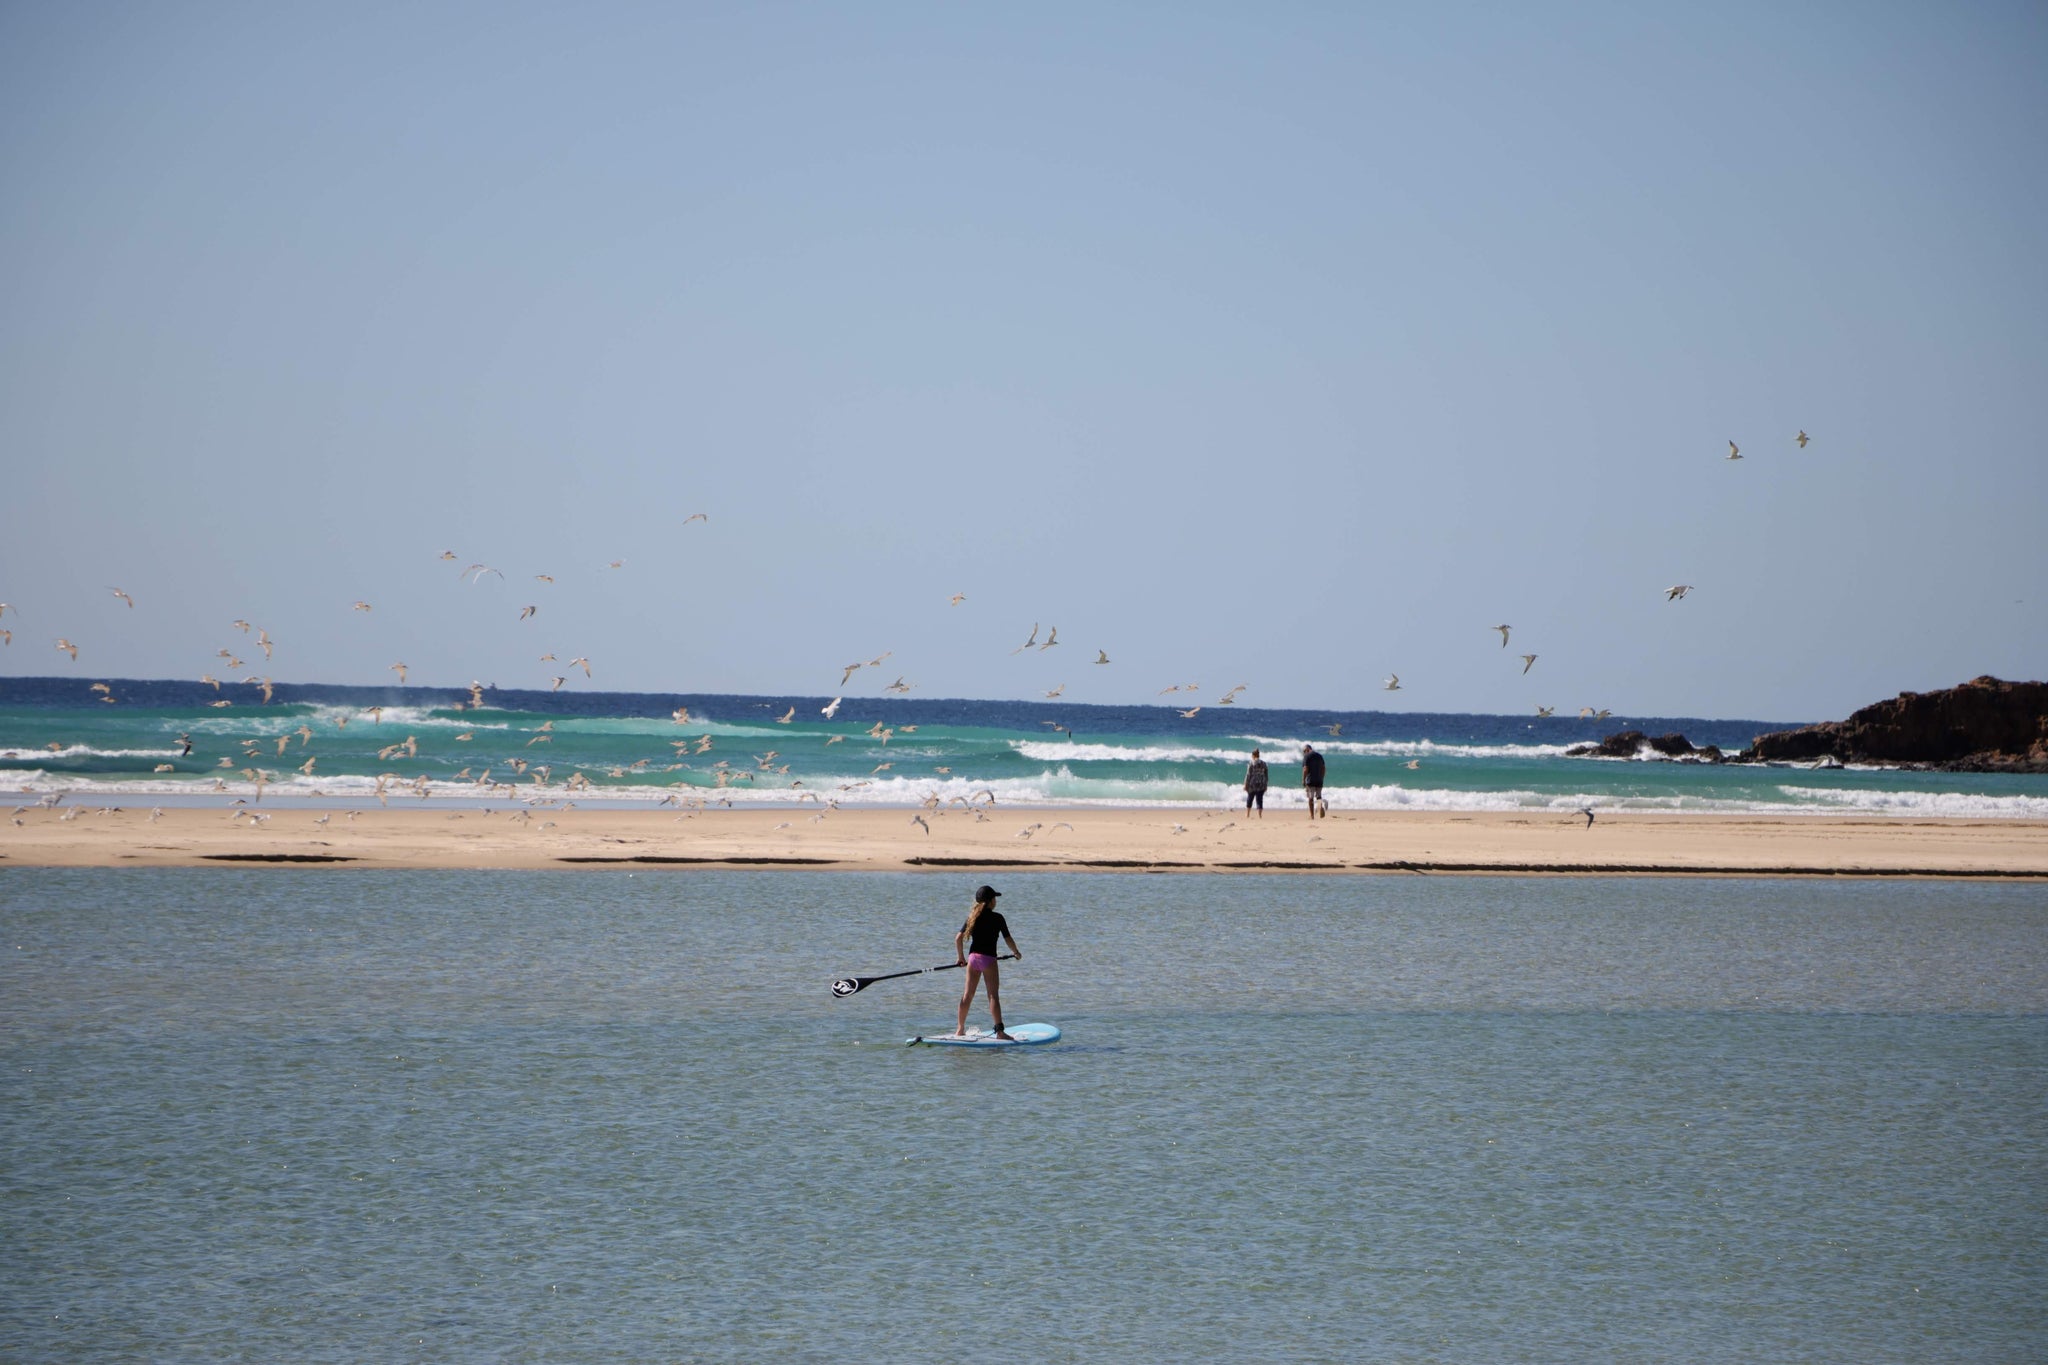 Orchid beach, Fraser Island, Australia. Stand up paddle boarding